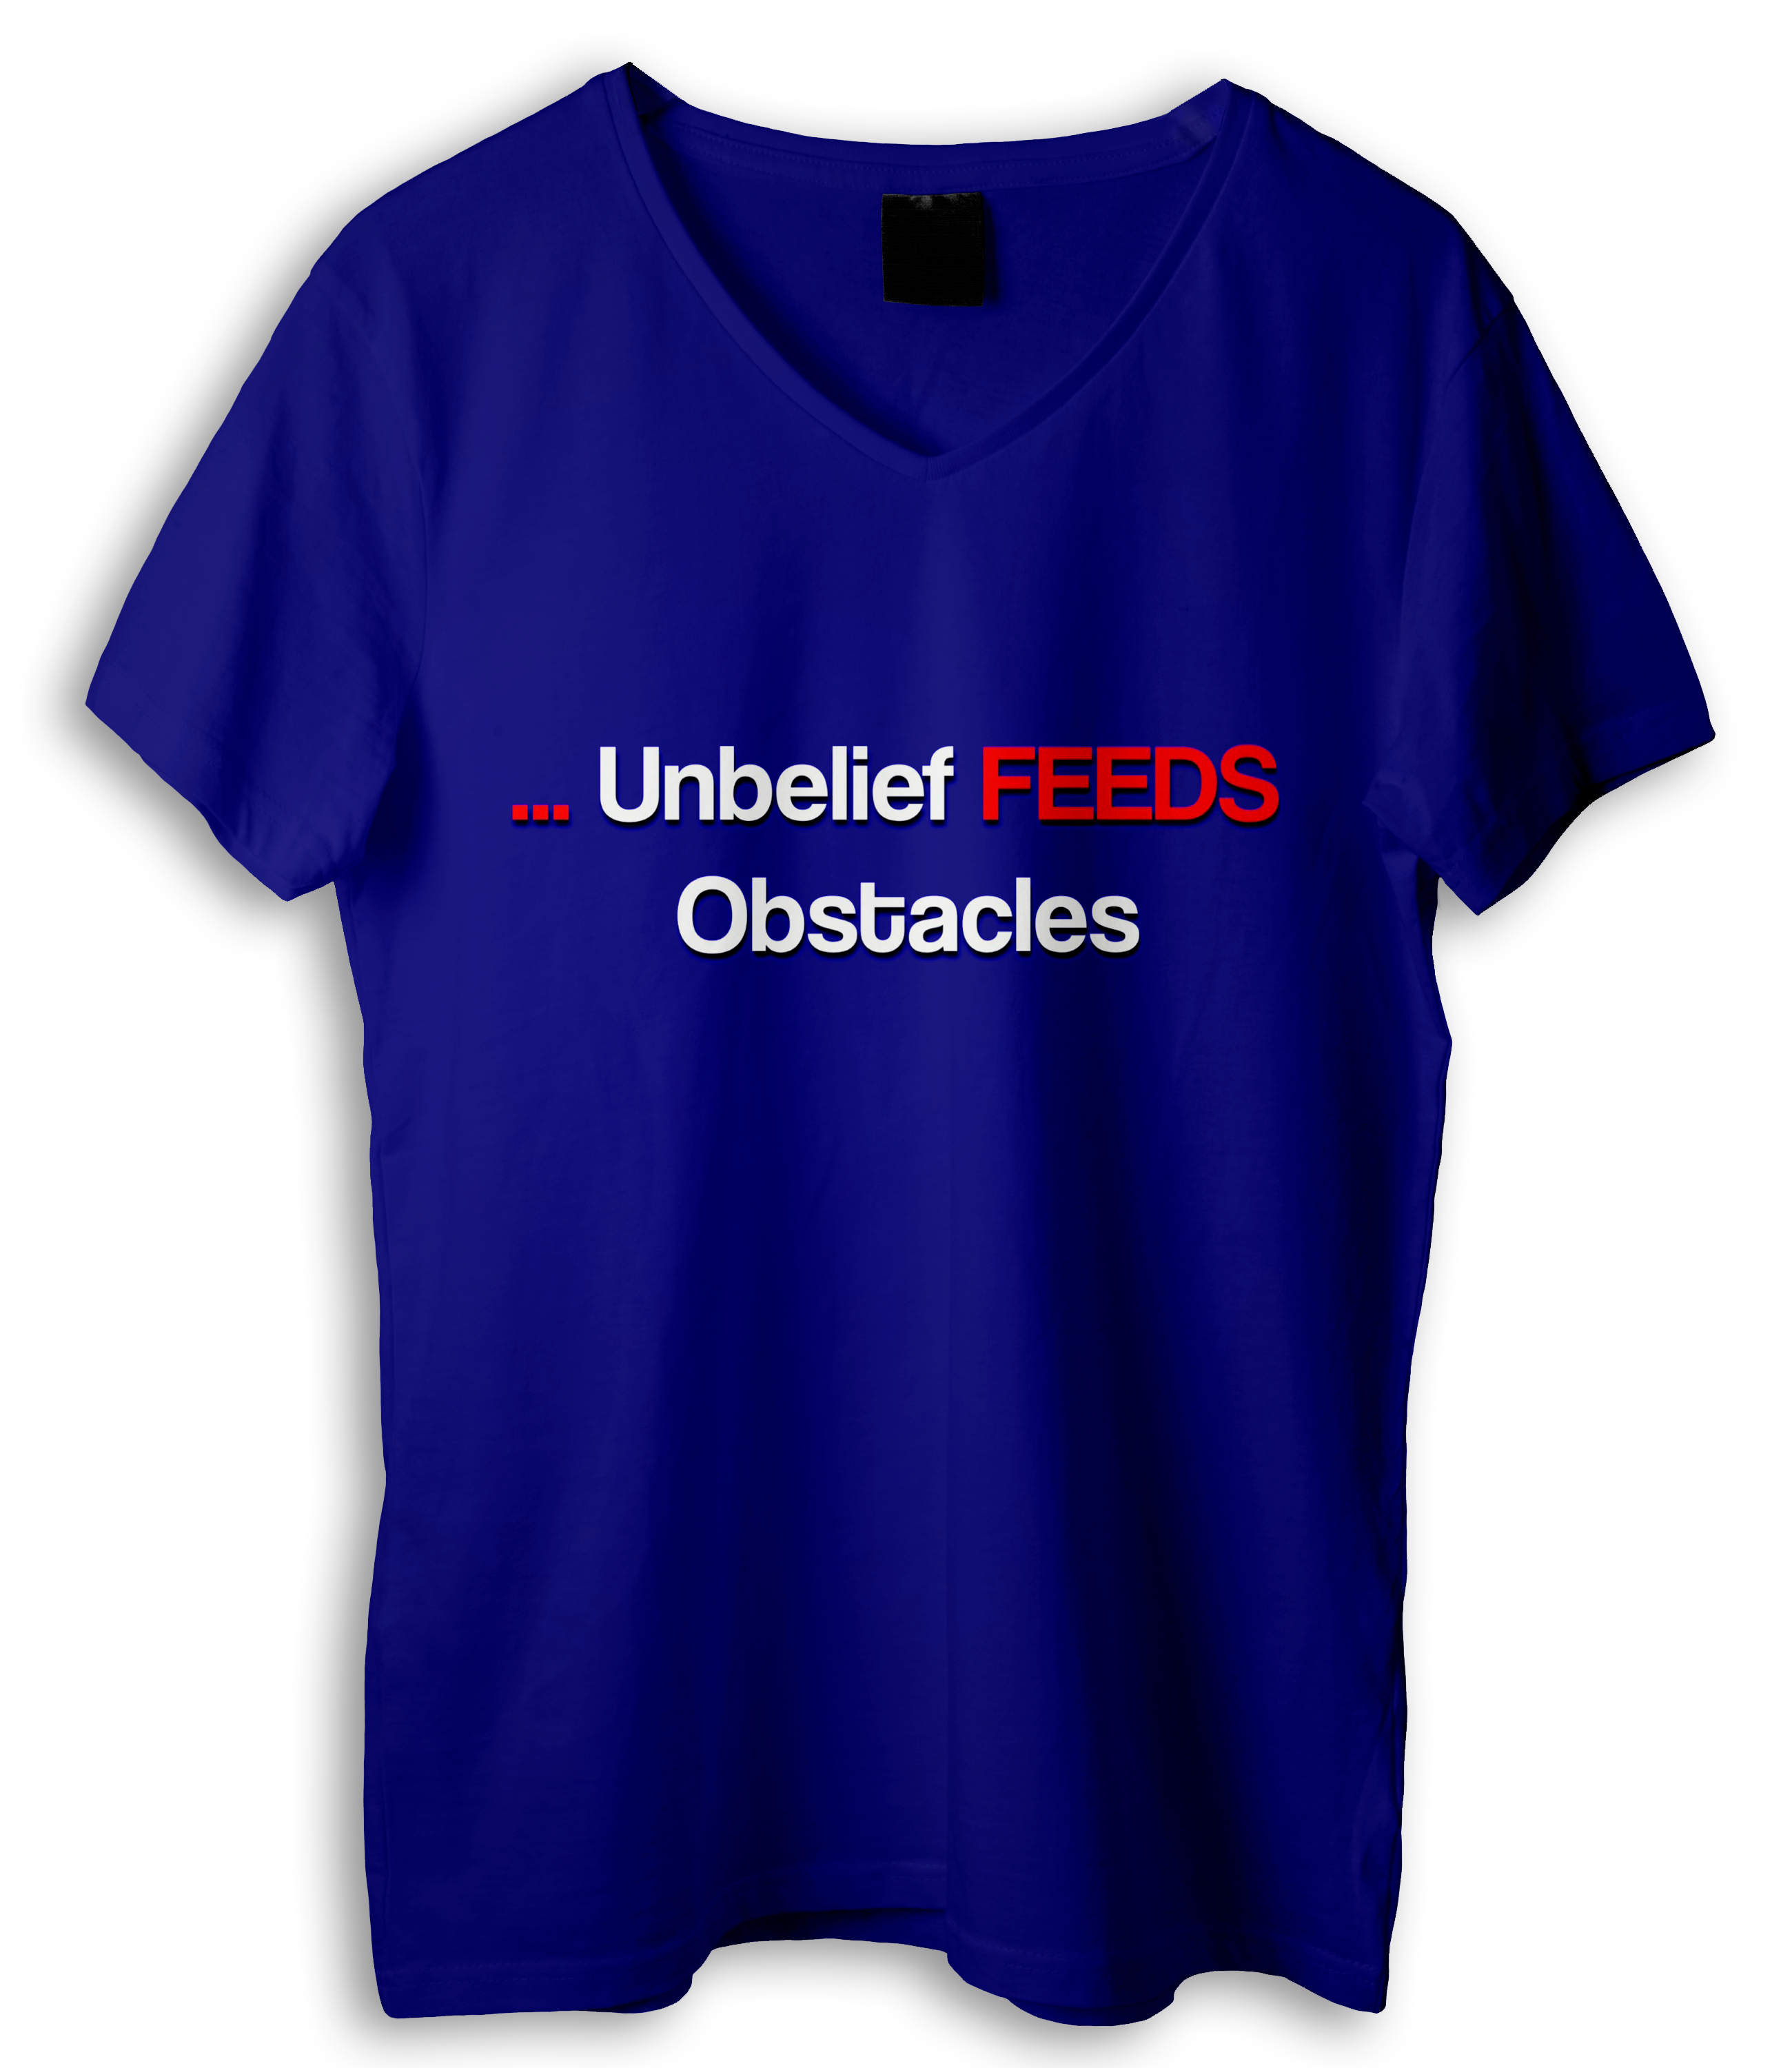 Unbelief Feeds Obstacles Shirt